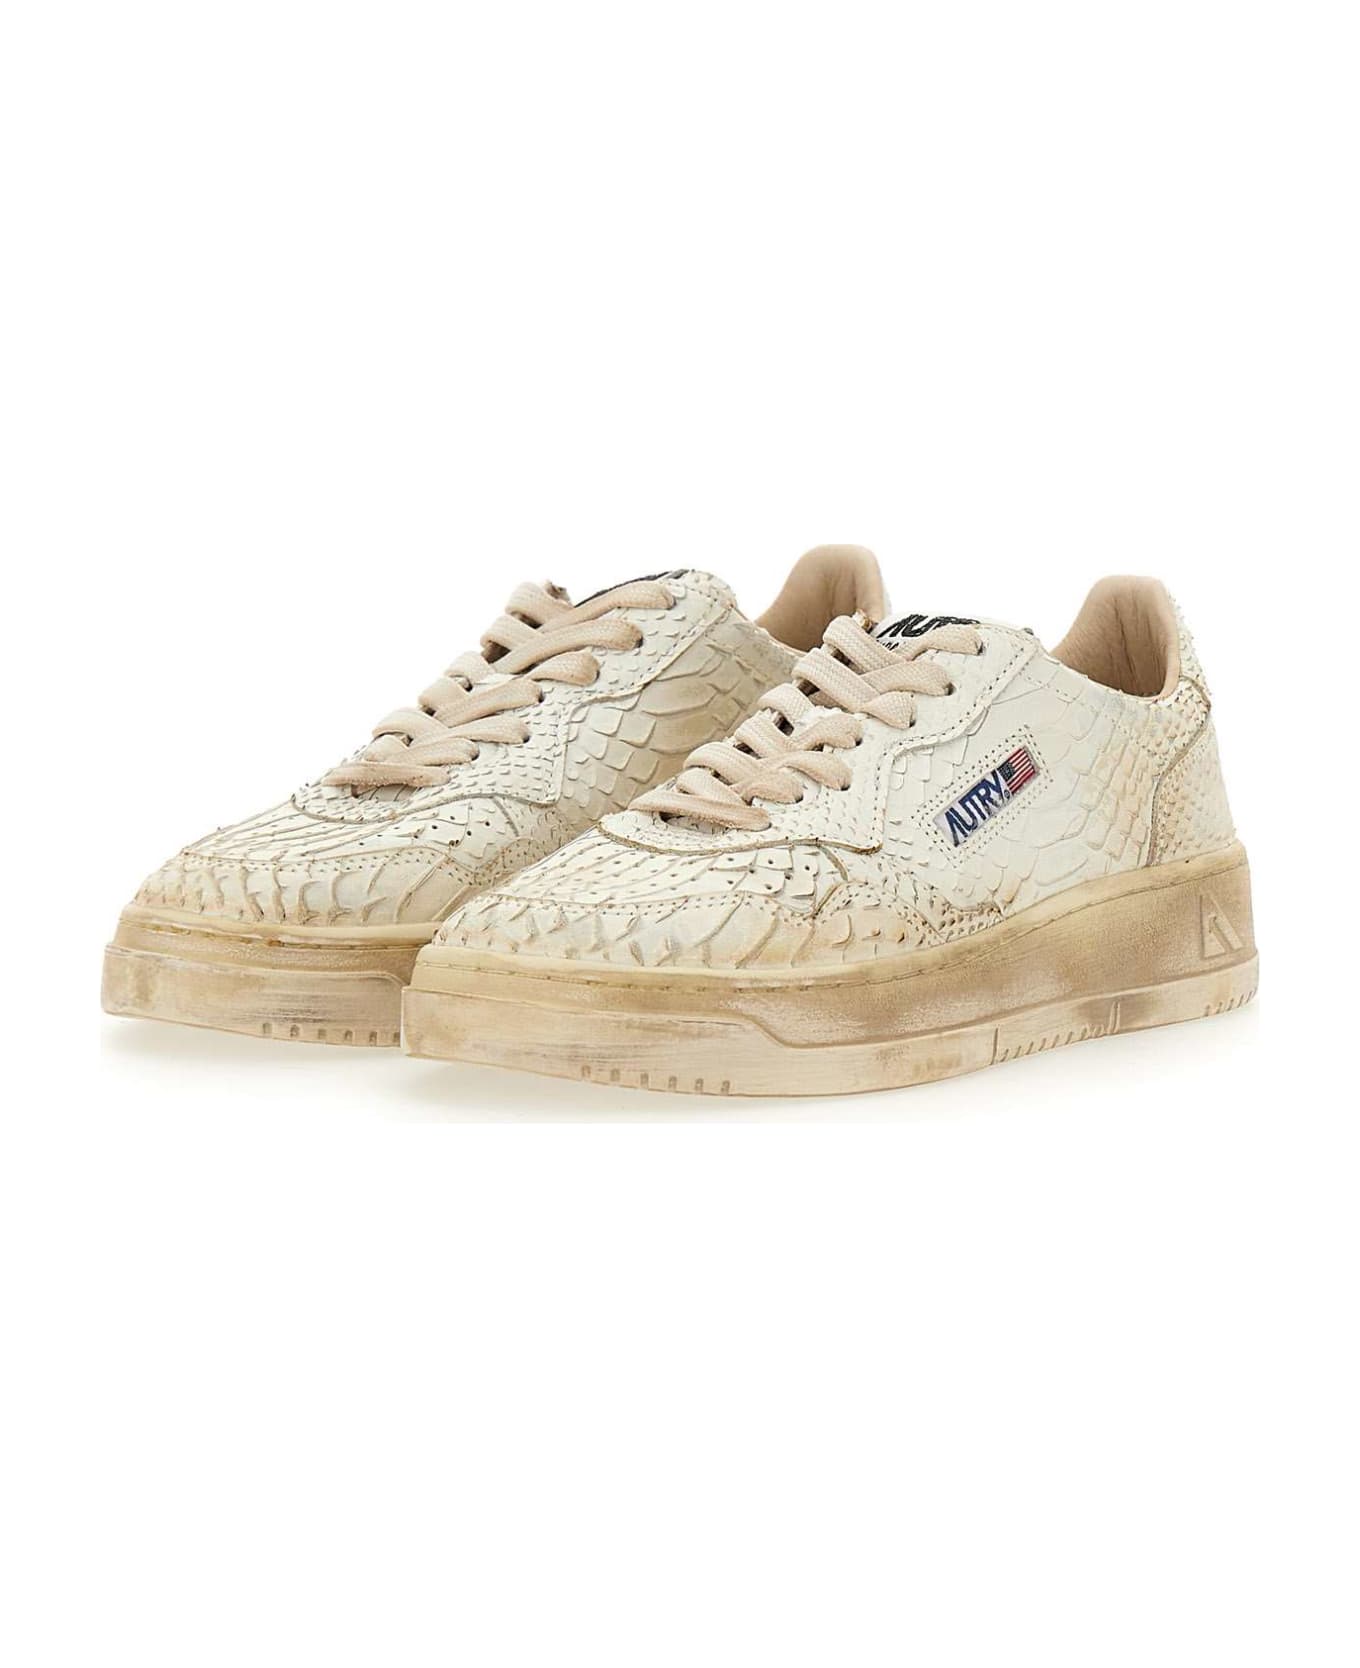 Autry 'avlw Pc06' Sneakers - WHITE